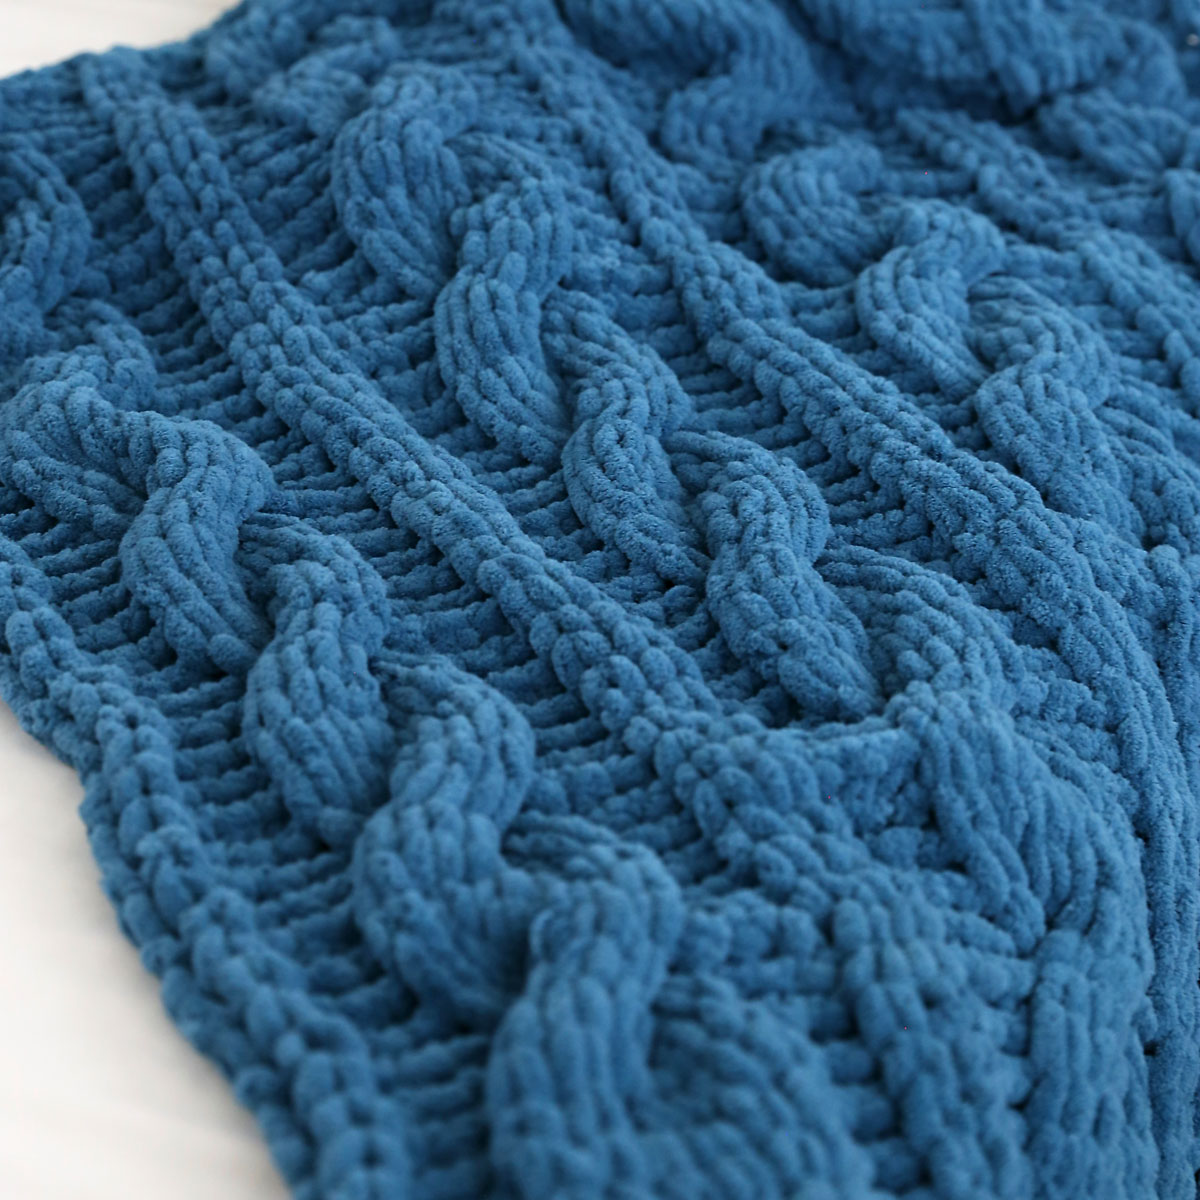 Cable knit blanket made from loop yarn